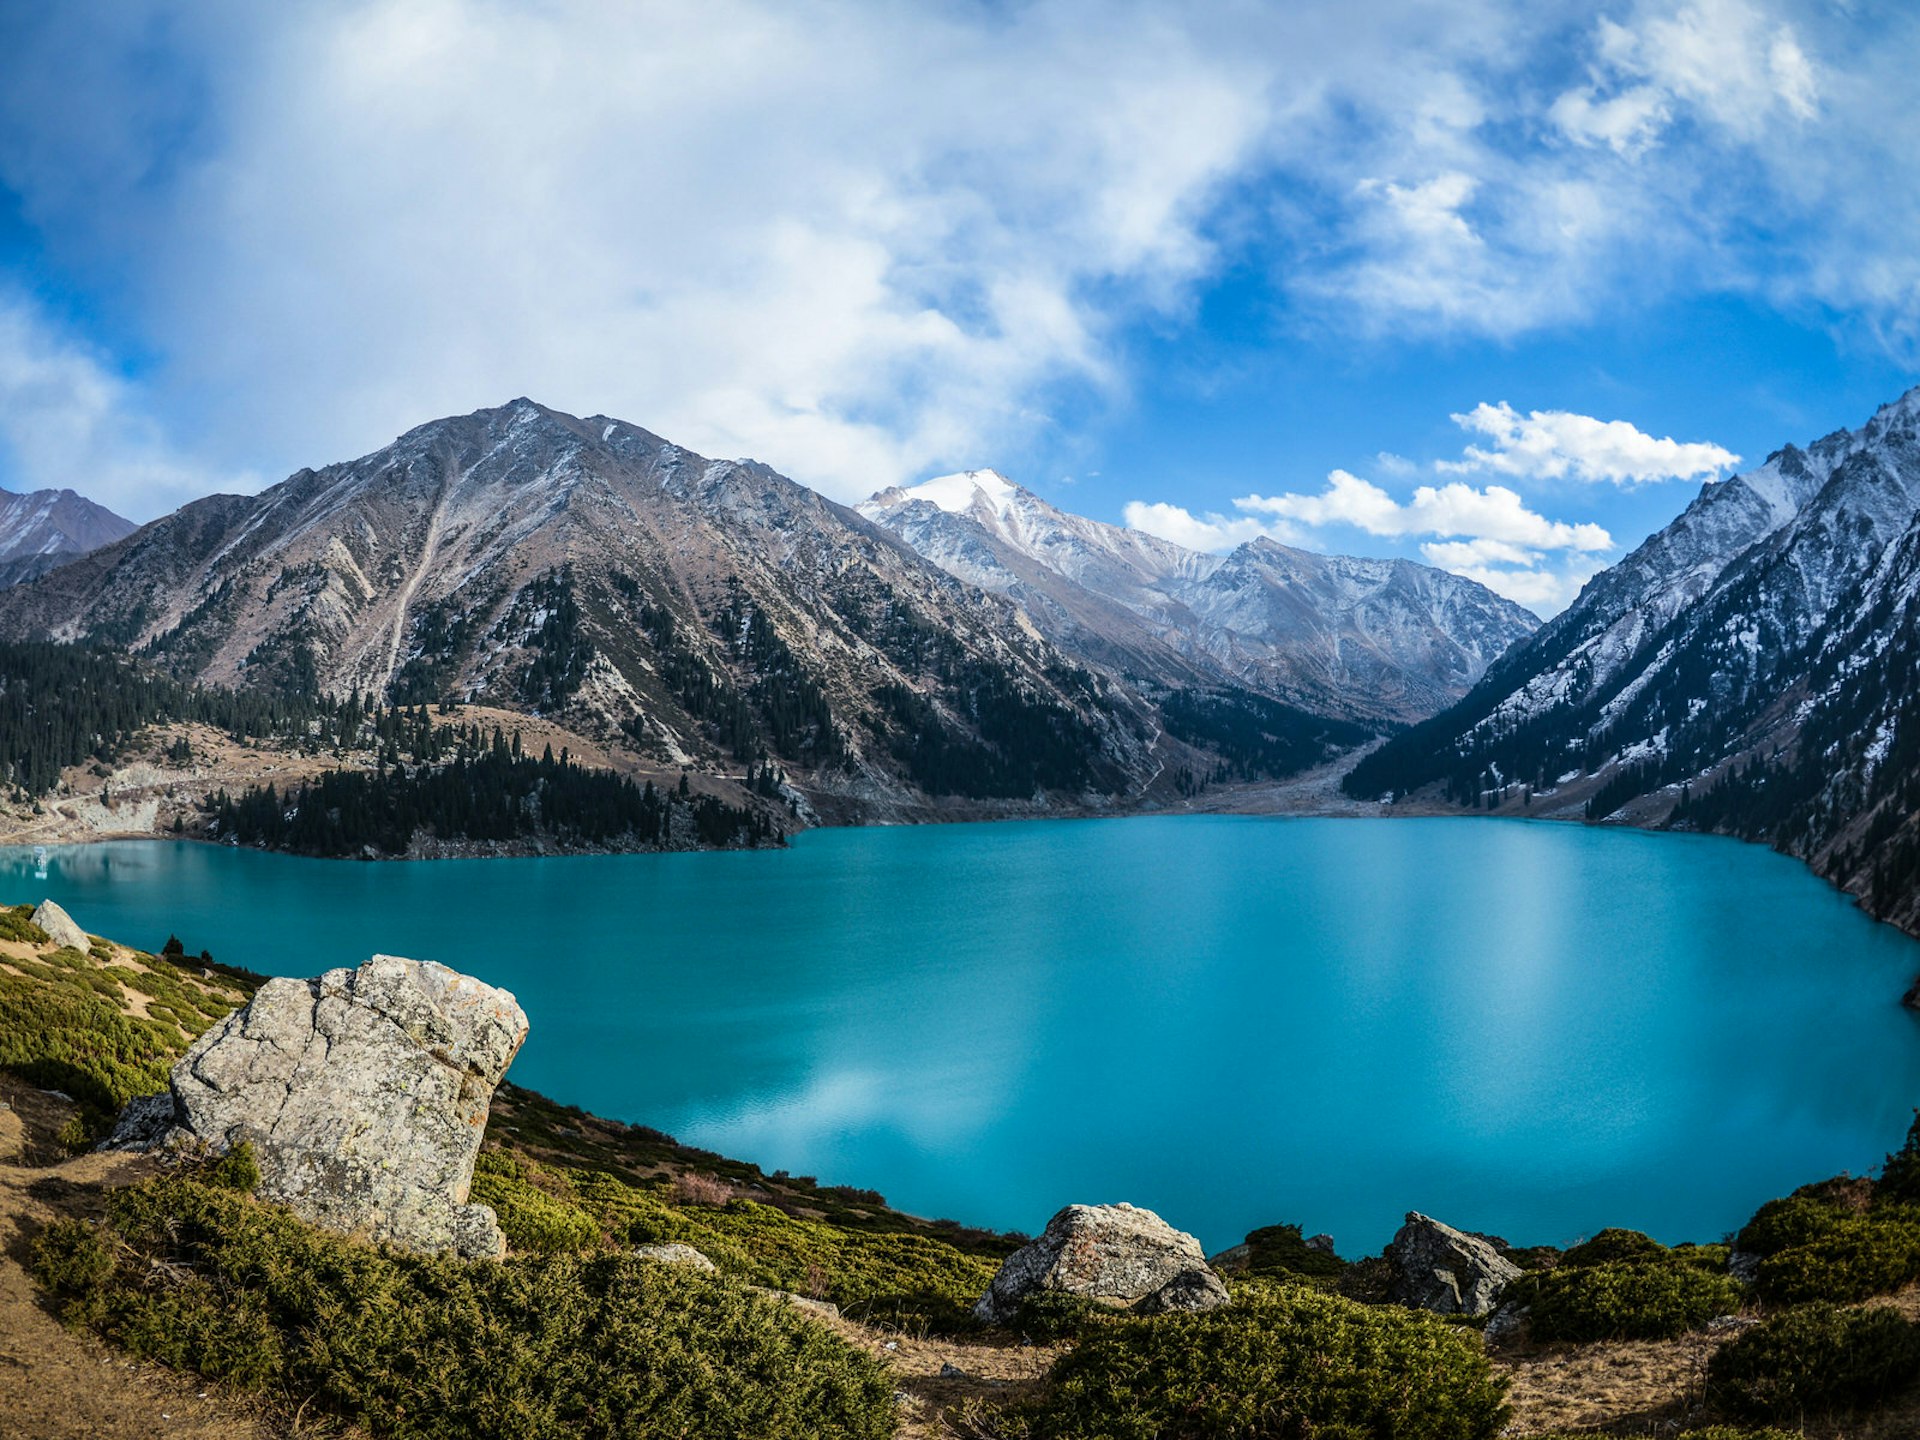 A turquoise lake surrounded by snow-capped mountains and blue sky © Aureliy / Shutterstock